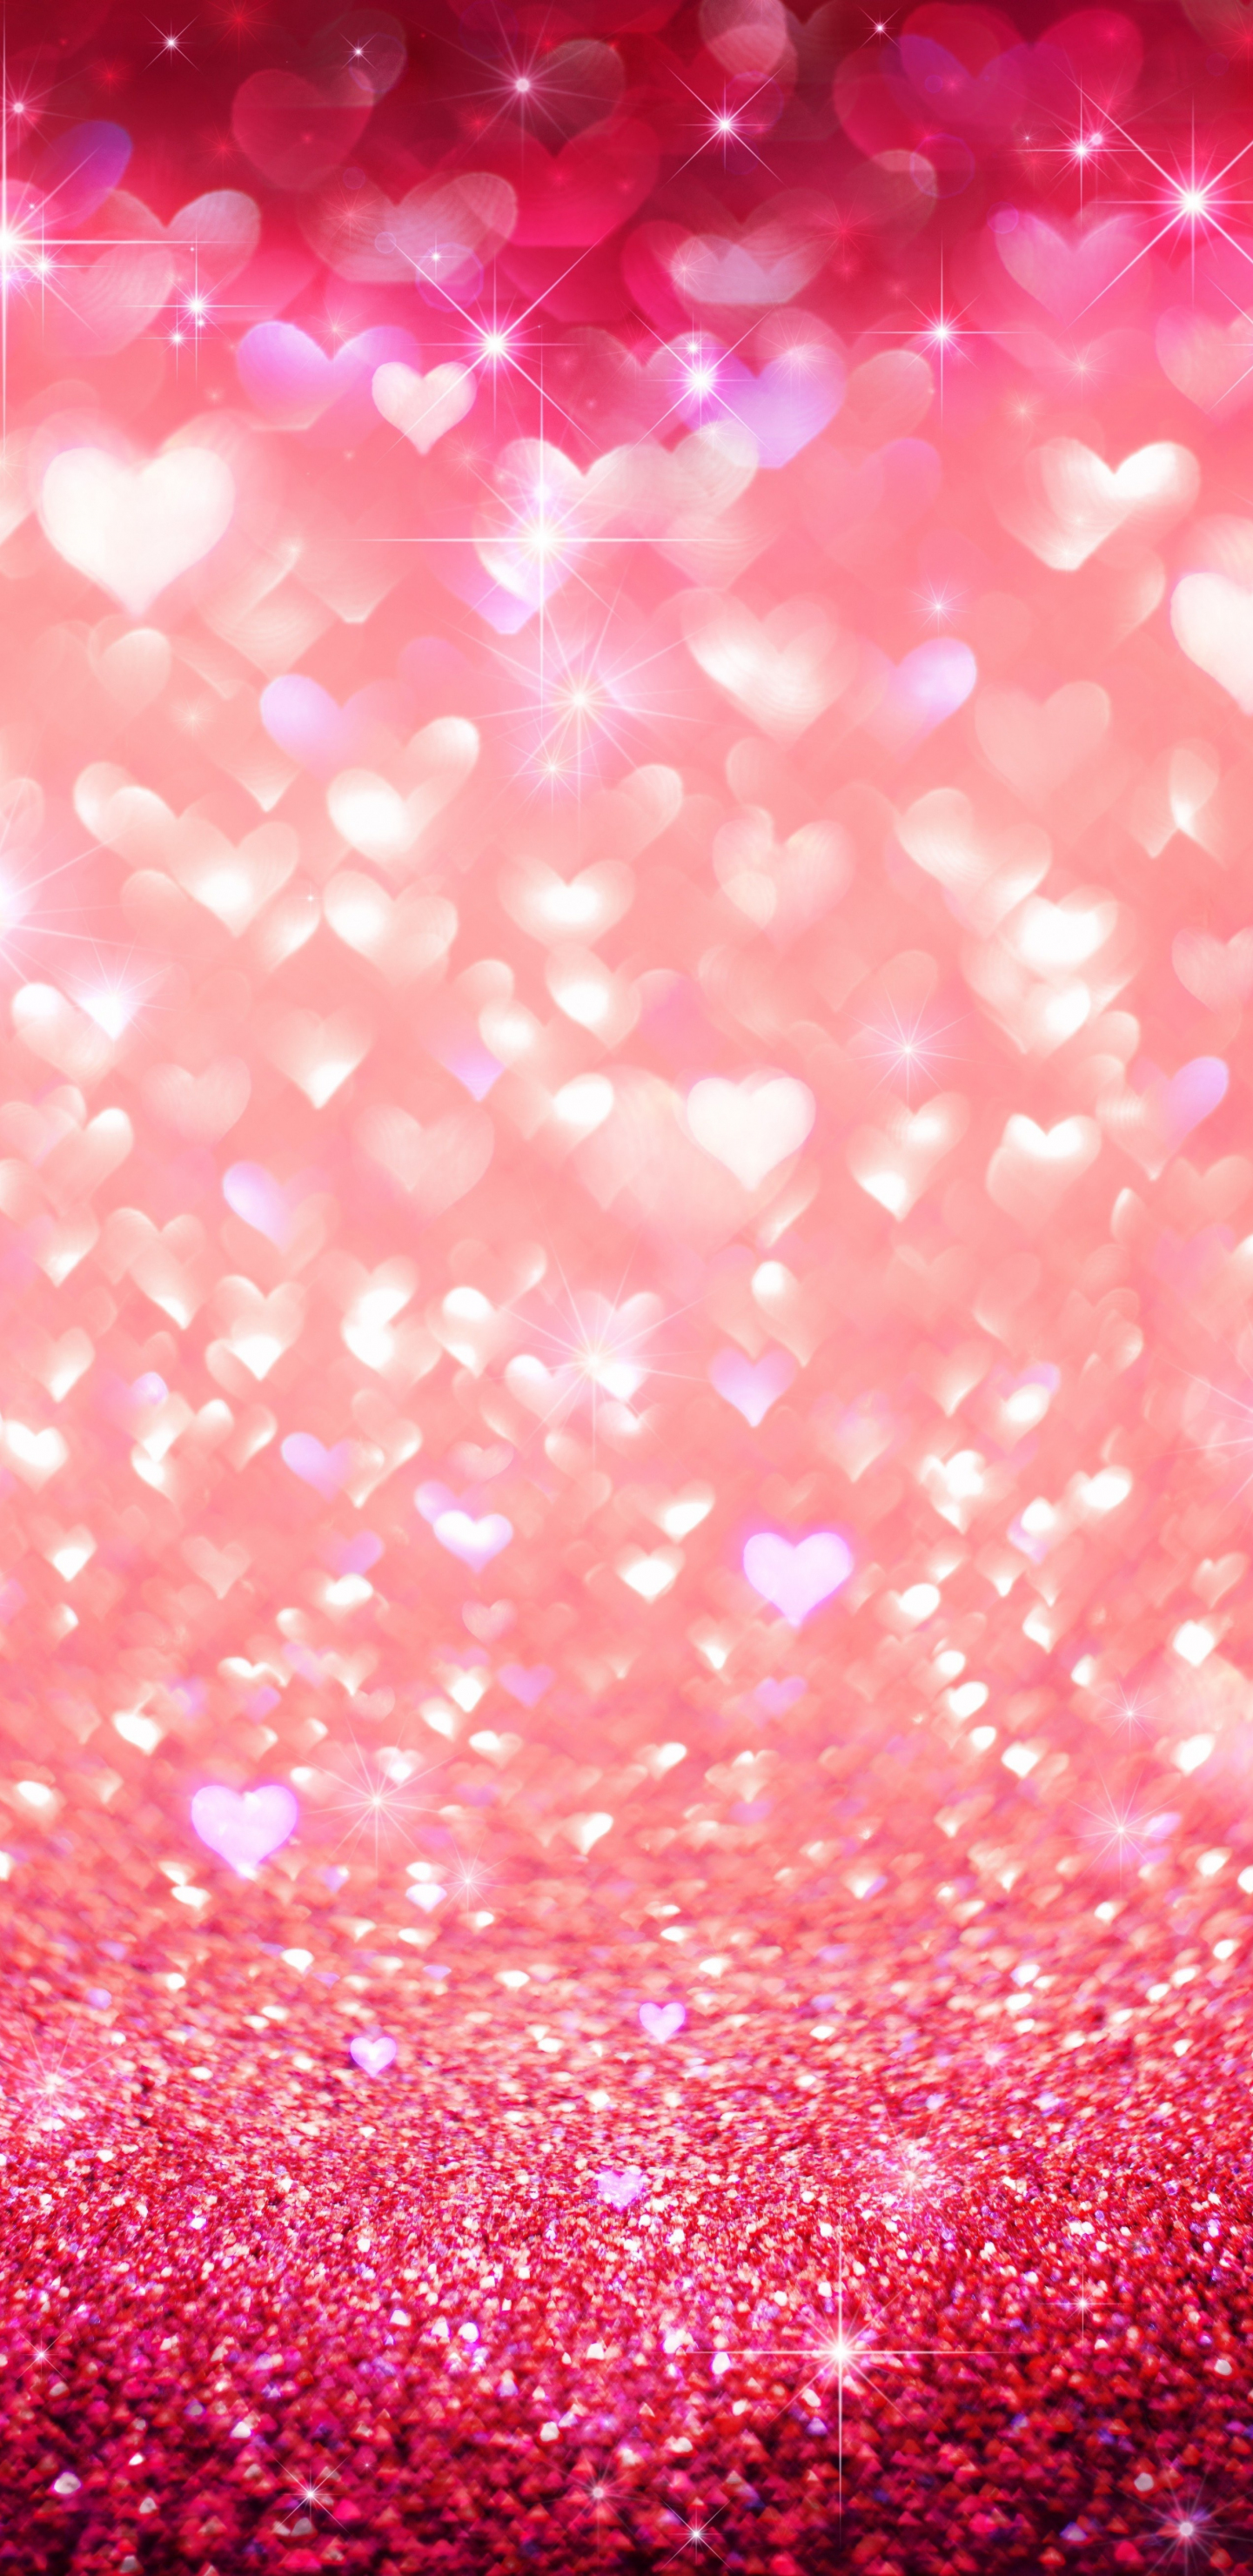 Download wallpaper 1440x2960 hearts, glitters, shining, abstract, samsung  galaxy s8, samsung galaxy s8 plus, 1440x2960 hd background, 6715